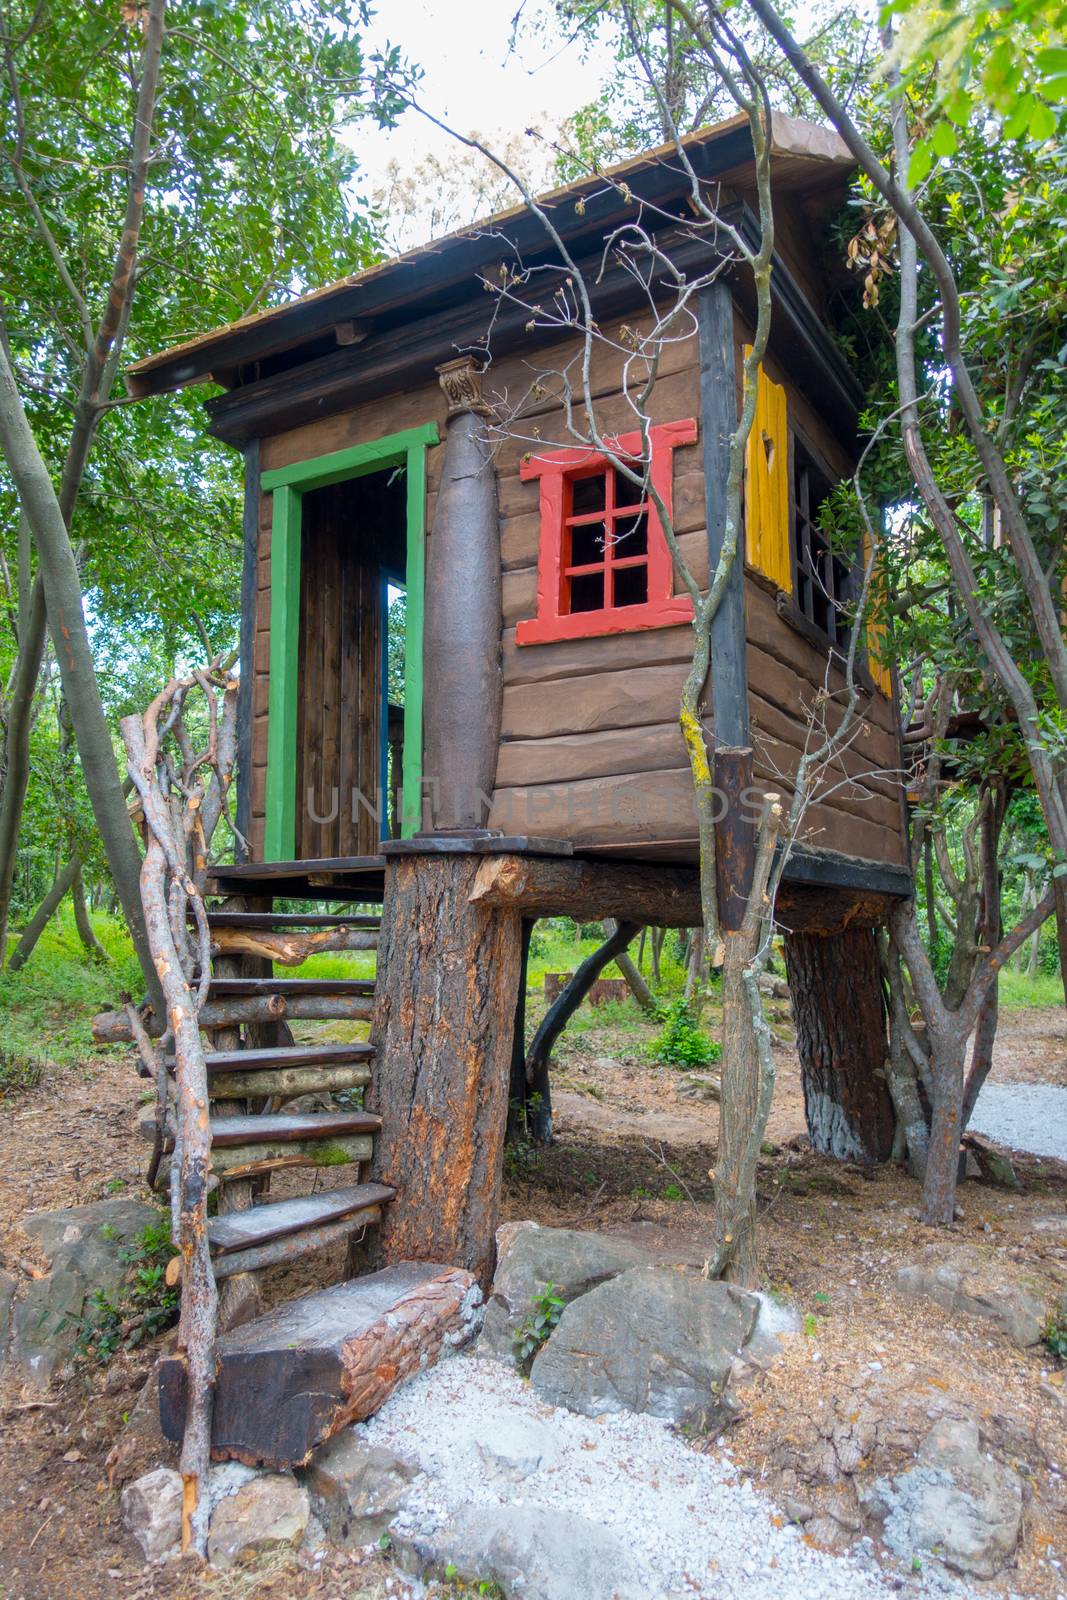 Fantasy tree house for children, playing by asafaric